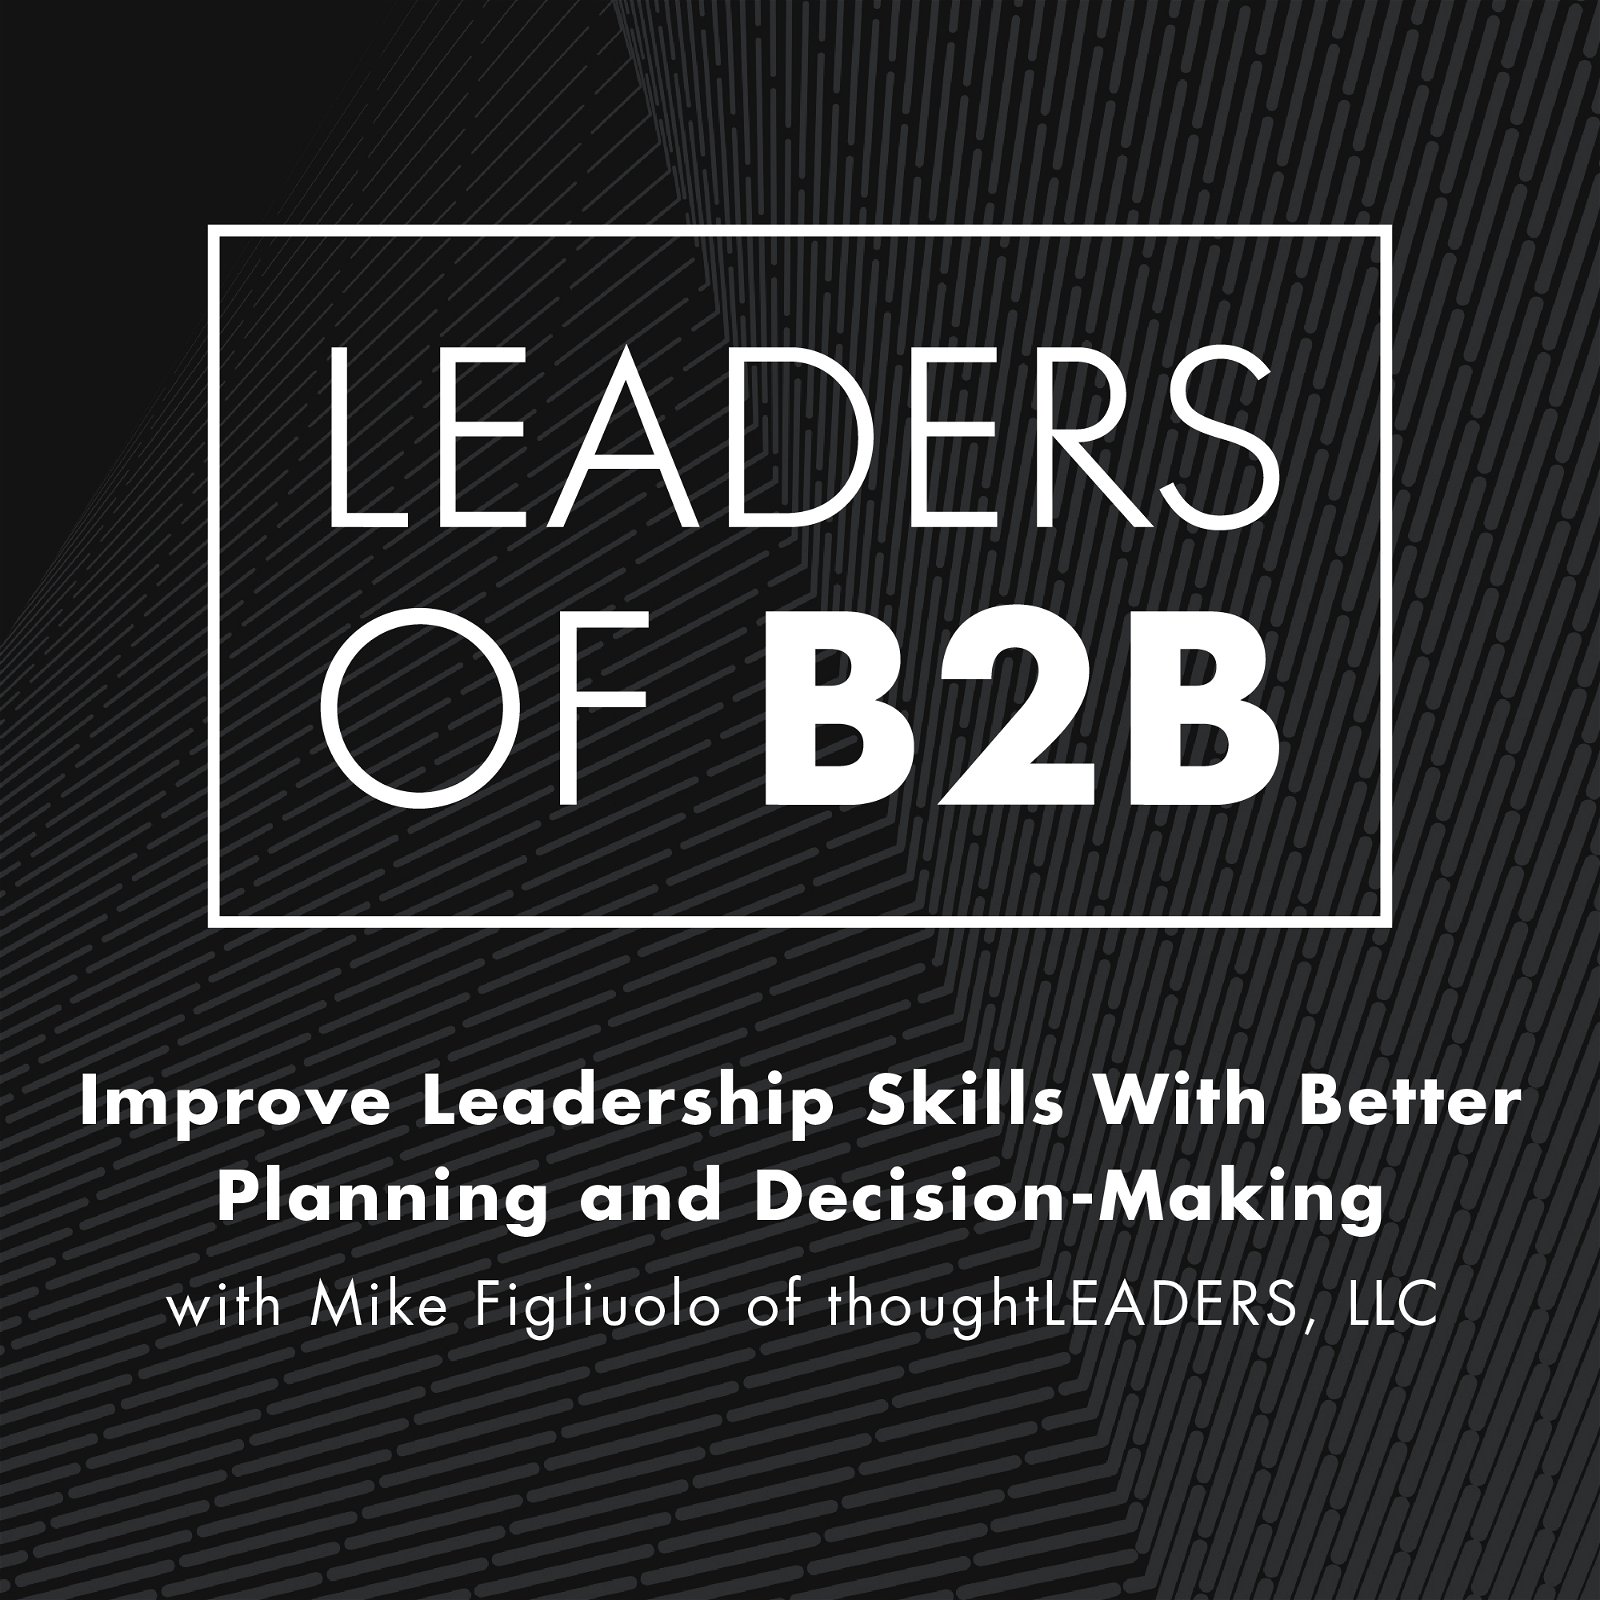 Improve Leadership Skills With Better Planning and Decision-Making with Mike Figliuolo of thoughtLEADERS, LLC